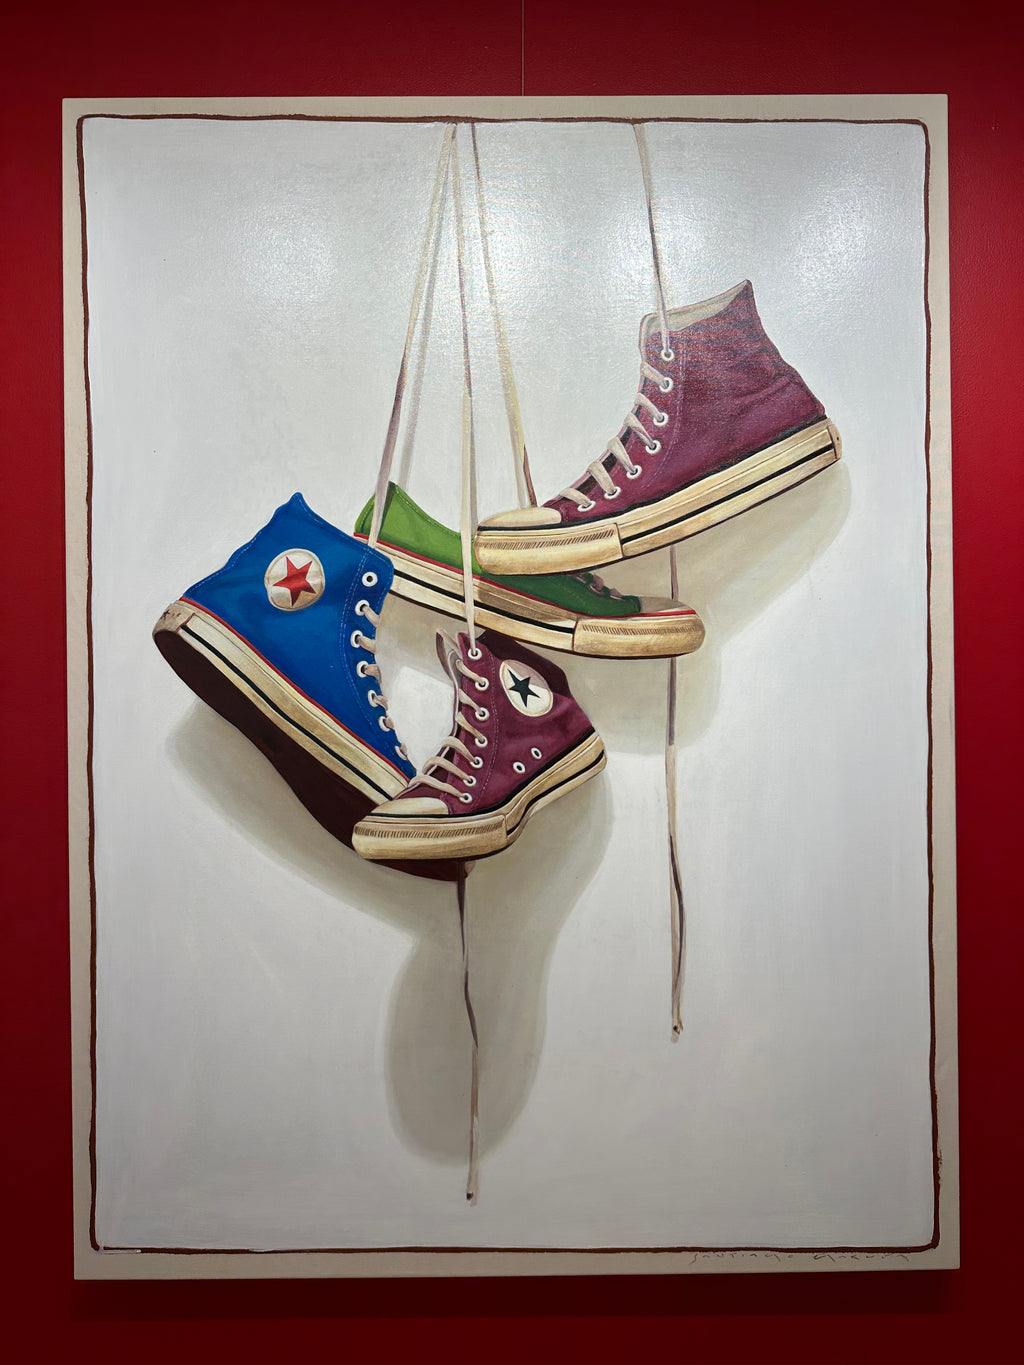 oil painting of blue, green, and deep purple converse sneakers hanging by laces